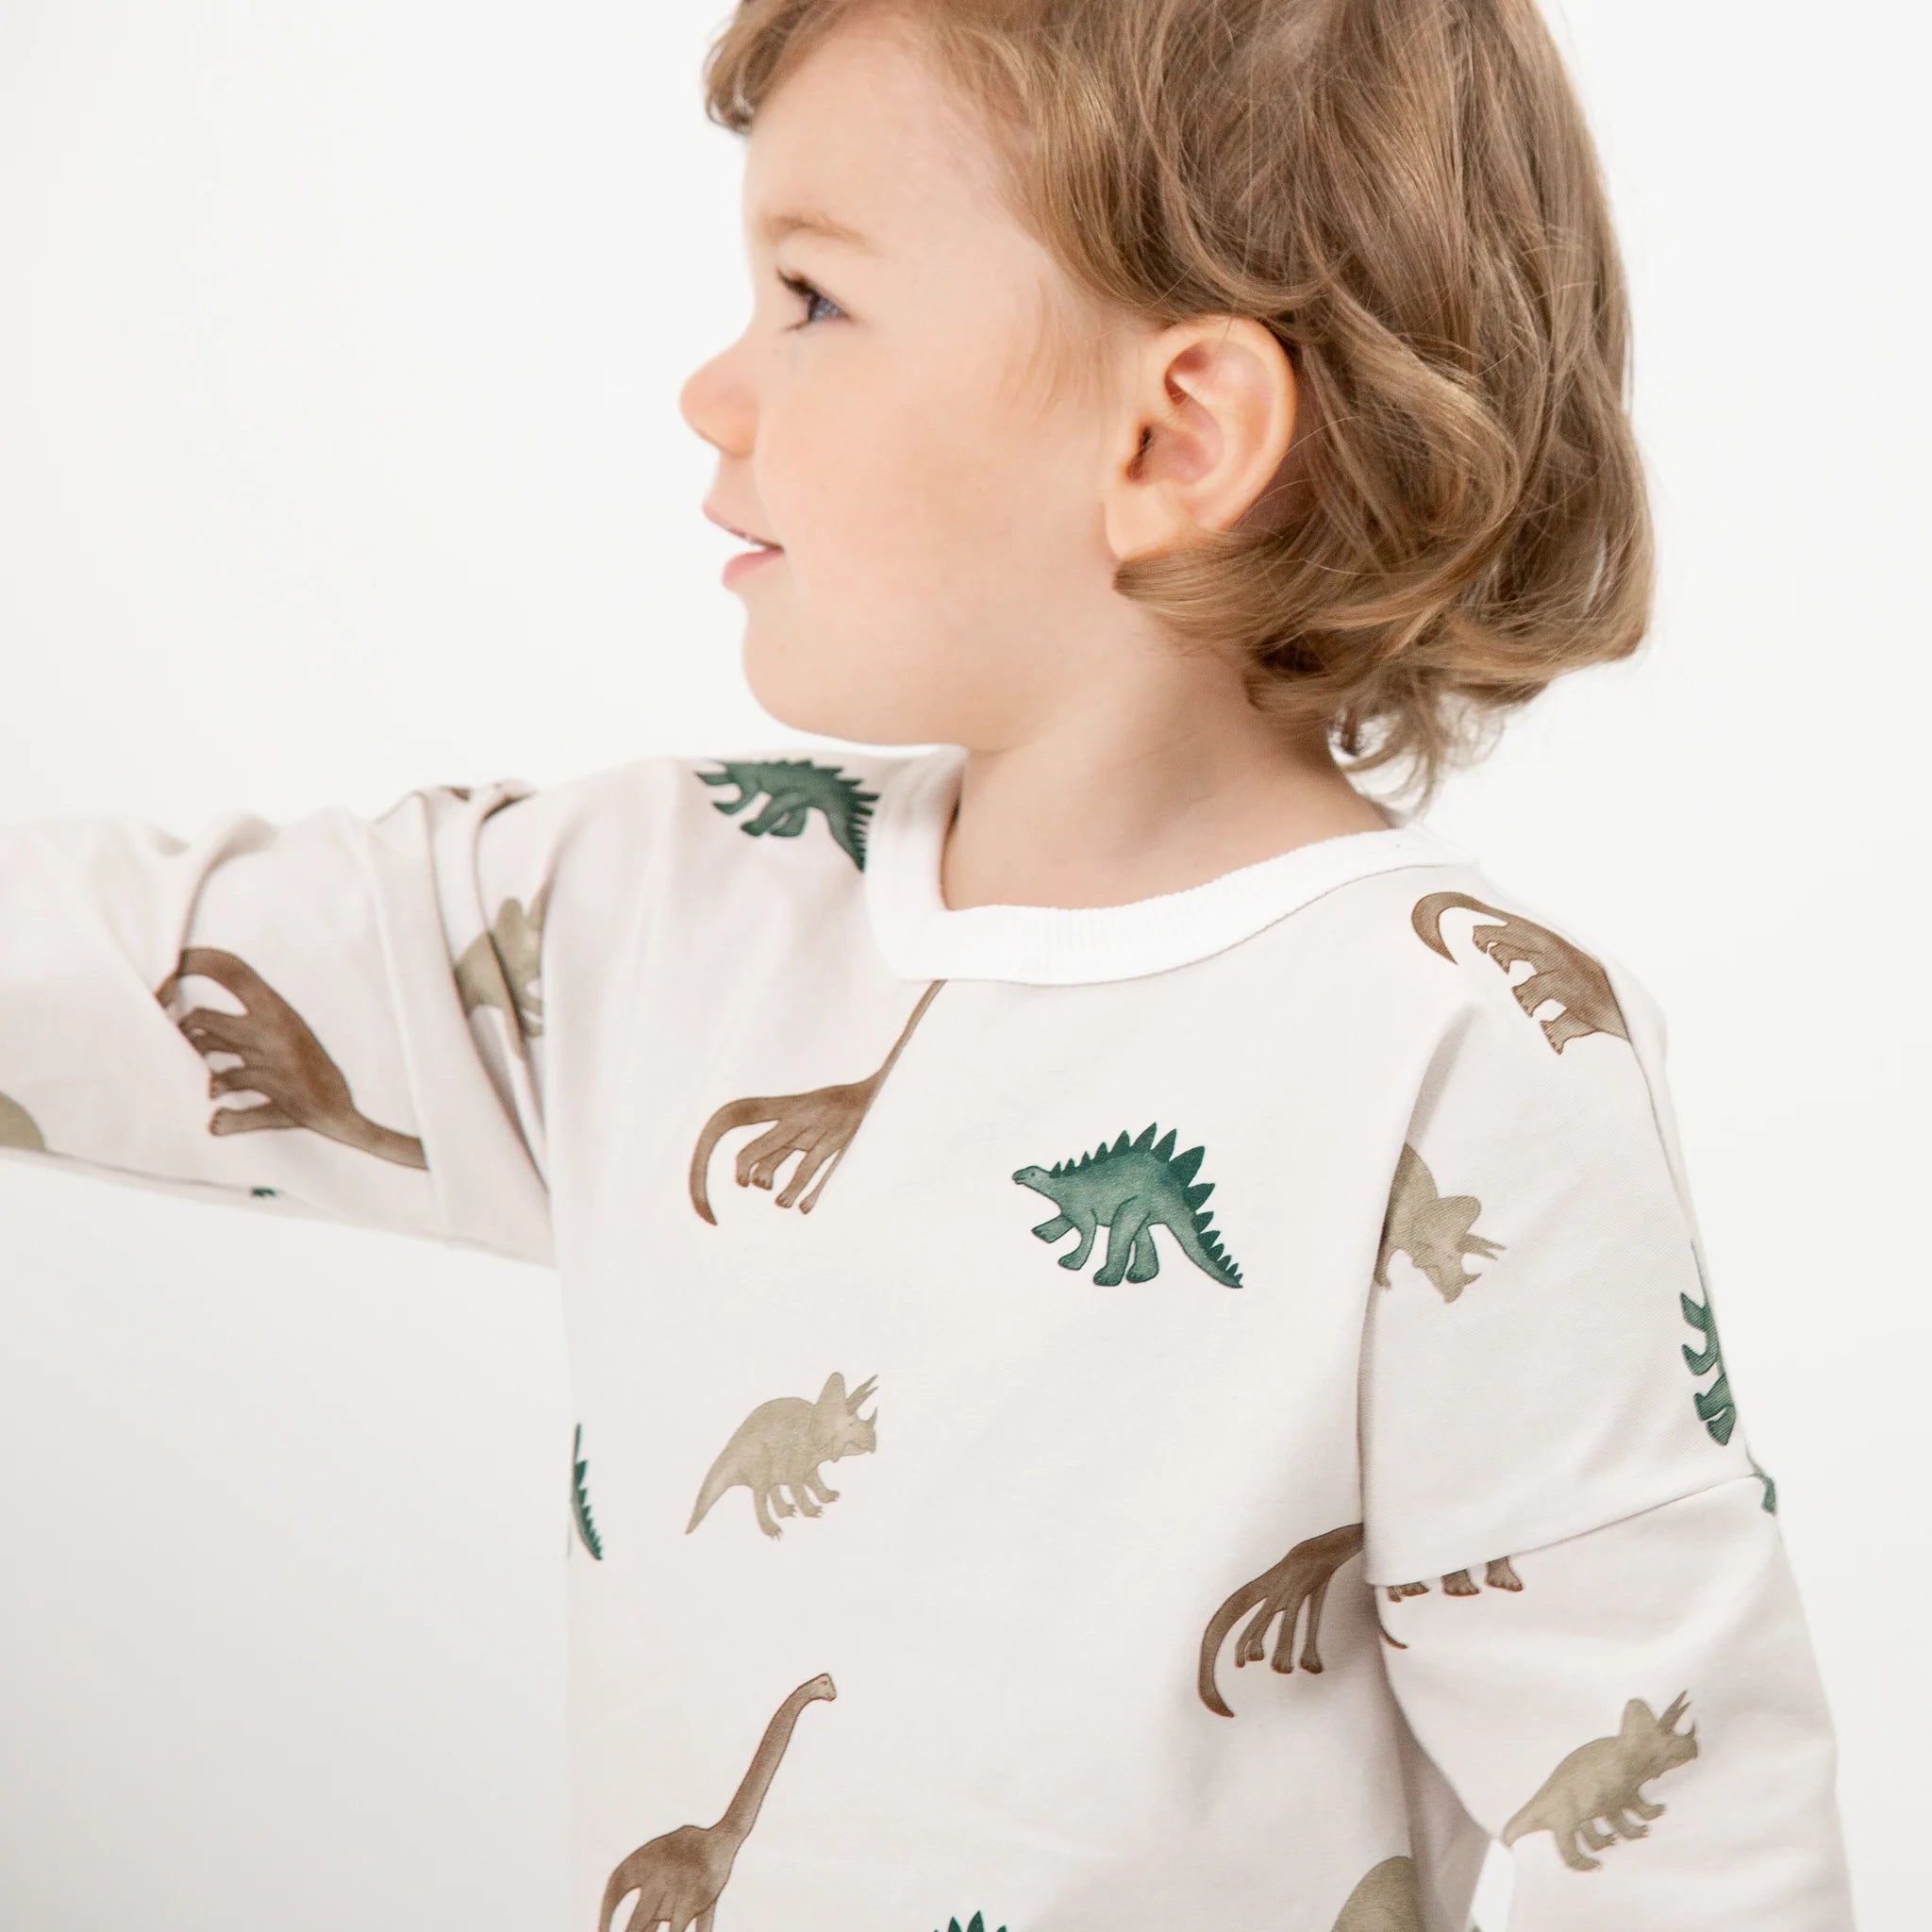 Sweater for babies and children - Dinosaurs